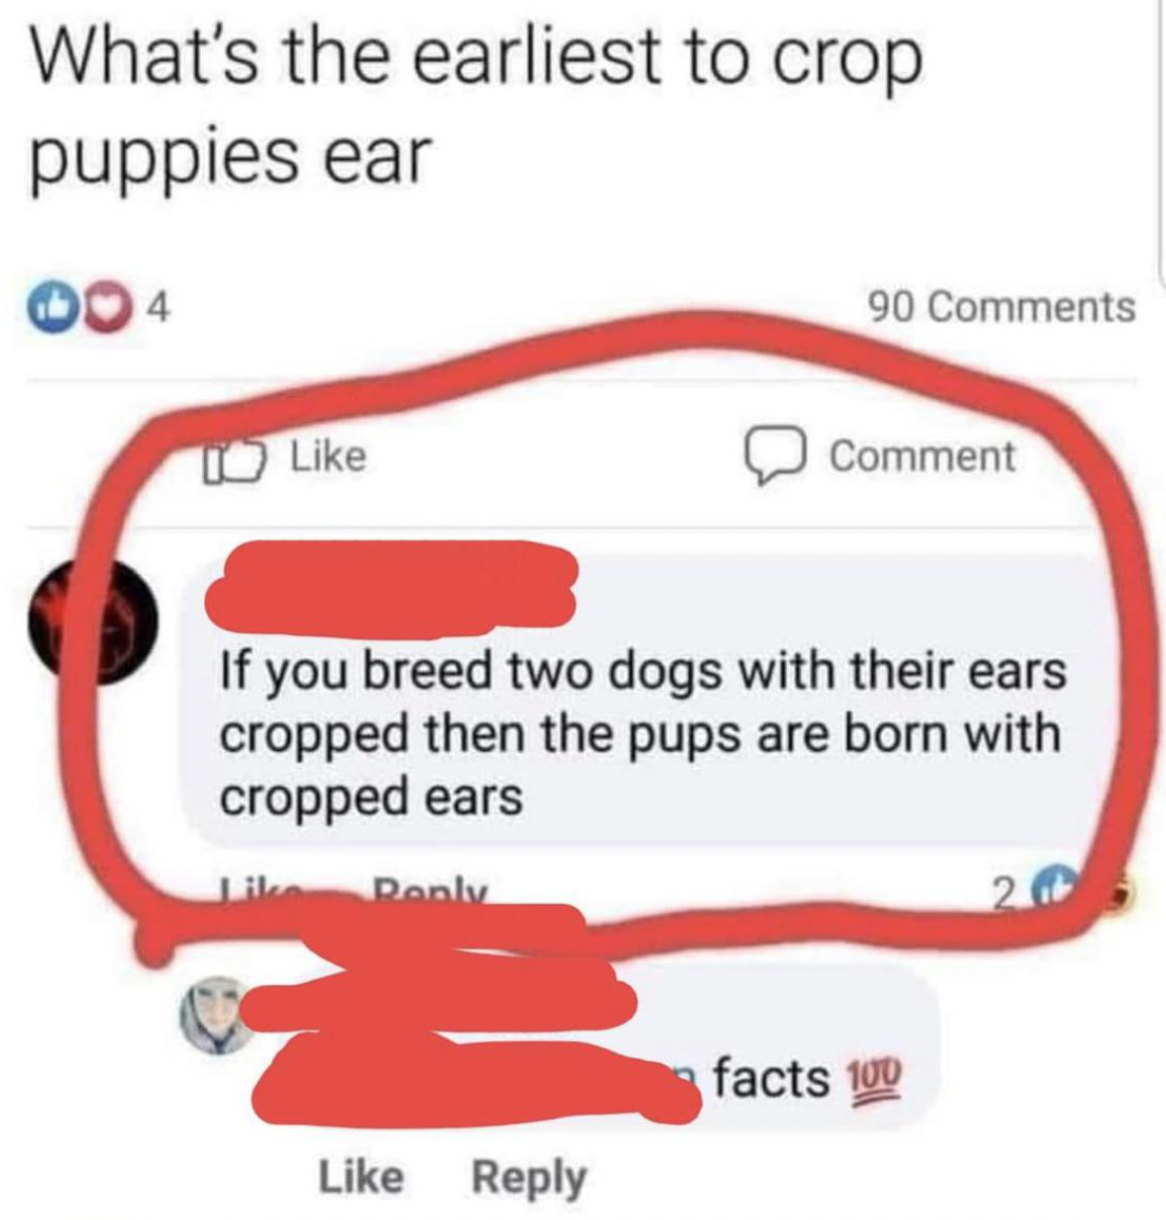 Confidently Incorrect - fashion accessory - What's the earliest to crop puppies ear